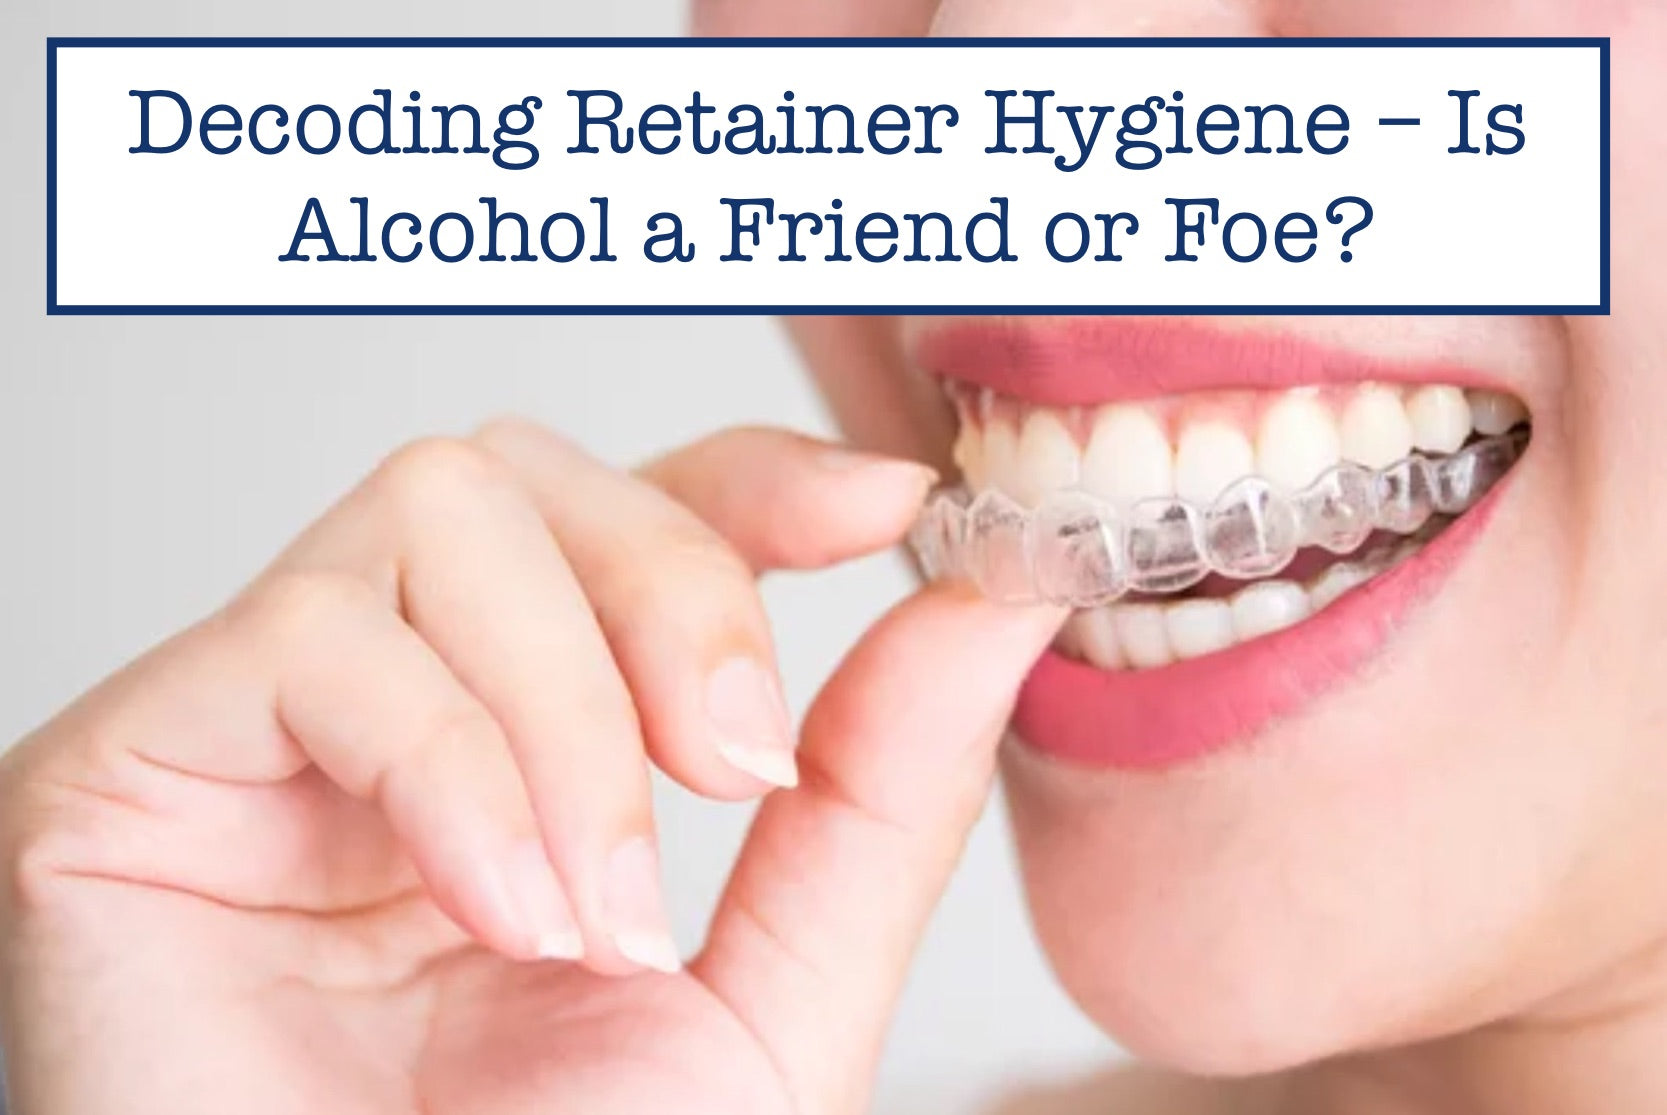 Decoding Retainer Hygiene – Is Alcohol a Friend or Foe?